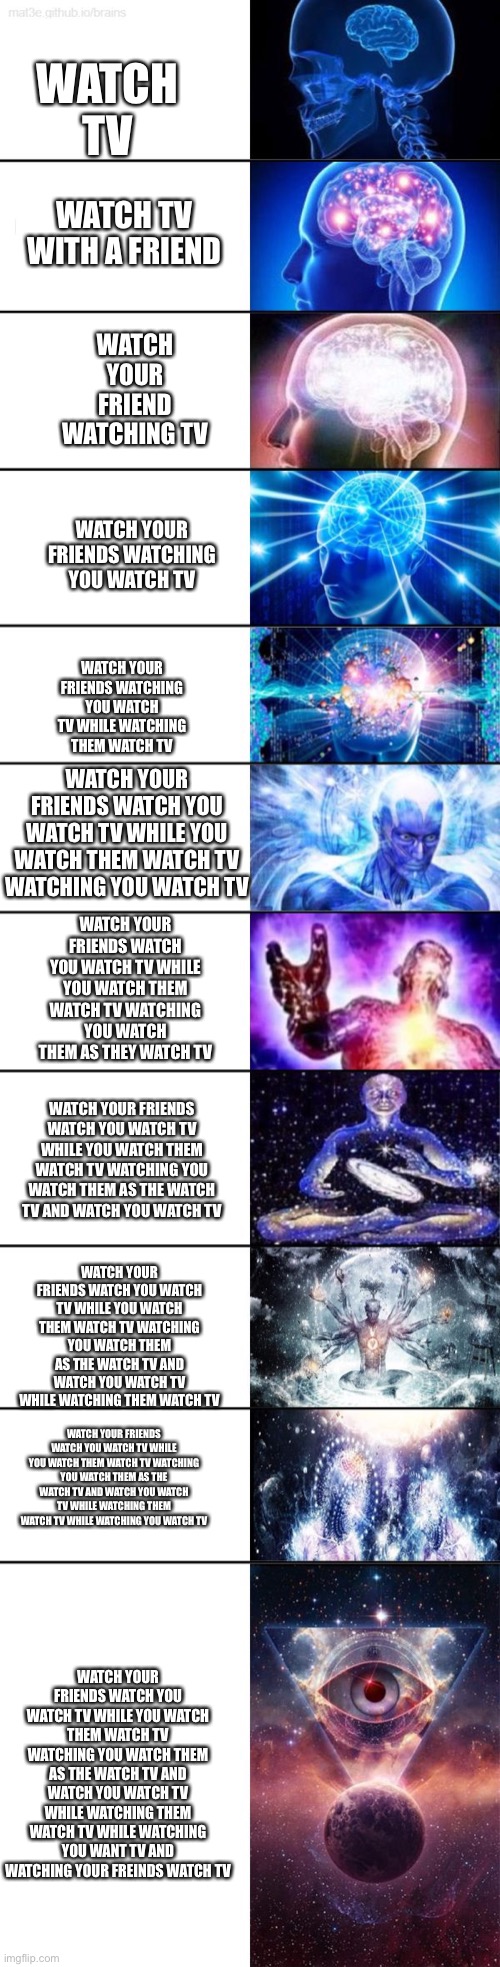 Watch your friends watch you watch tv while you watch them watch tv watching you watch them as the watch tv and watch you watch  | WATCH TV; WATCH TV WITH A FRIEND; WATCH YOUR FRIEND WATCHING TV; WATCH YOUR FRIENDS WATCHING YOU WATCH TV; WATCH YOUR FRIENDS WATCHING YOU WATCH TV WHILE WATCHING THEM WATCH TV; WATCH YOUR FRIENDS WATCH YOU WATCH TV WHILE YOU WATCH THEM WATCH TV WATCHING YOU WATCH TV; WATCH YOUR FRIENDS WATCH YOU WATCH TV WHILE YOU WATCH THEM WATCH TV WATCHING YOU WATCH THEM AS THEY WATCH TV; WATCH YOUR FRIENDS WATCH YOU WATCH TV WHILE YOU WATCH THEM WATCH TV WATCHING YOU WATCH THEM AS THE WATCH TV AND WATCH YOU WATCH TV; WATCH YOUR FRIENDS WATCH YOU WATCH TV WHILE YOU WATCH THEM WATCH TV WATCHING YOU WATCH THEM AS THE WATCH TV AND WATCH YOU WATCH TV WHILE WATCHING THEM WATCH TV; WATCH YOUR FRIENDS WATCH YOU WATCH TV WHILE YOU WATCH THEM WATCH TV WATCHING YOU WATCH THEM AS THE WATCH TV AND WATCH YOU WATCH TV WHILE WATCHING THEM WATCH TV WHILE WATCHING YOU WATCH TV; WATCH YOUR FRIENDS WATCH YOU WATCH TV WHILE YOU WATCH THEM WATCH TV WATCHING YOU WATCH THEM AS THE WATCH TV AND WATCH YOU WATCH TV WHILE WATCHING THEM WATCH TV WHILE WATCHING YOU WANT TV AND WATCHING YOUR FREINDS WATCH TV | image tagged in big brain meme,tv,watching tv,expanding brain,smart | made w/ Imgflip meme maker